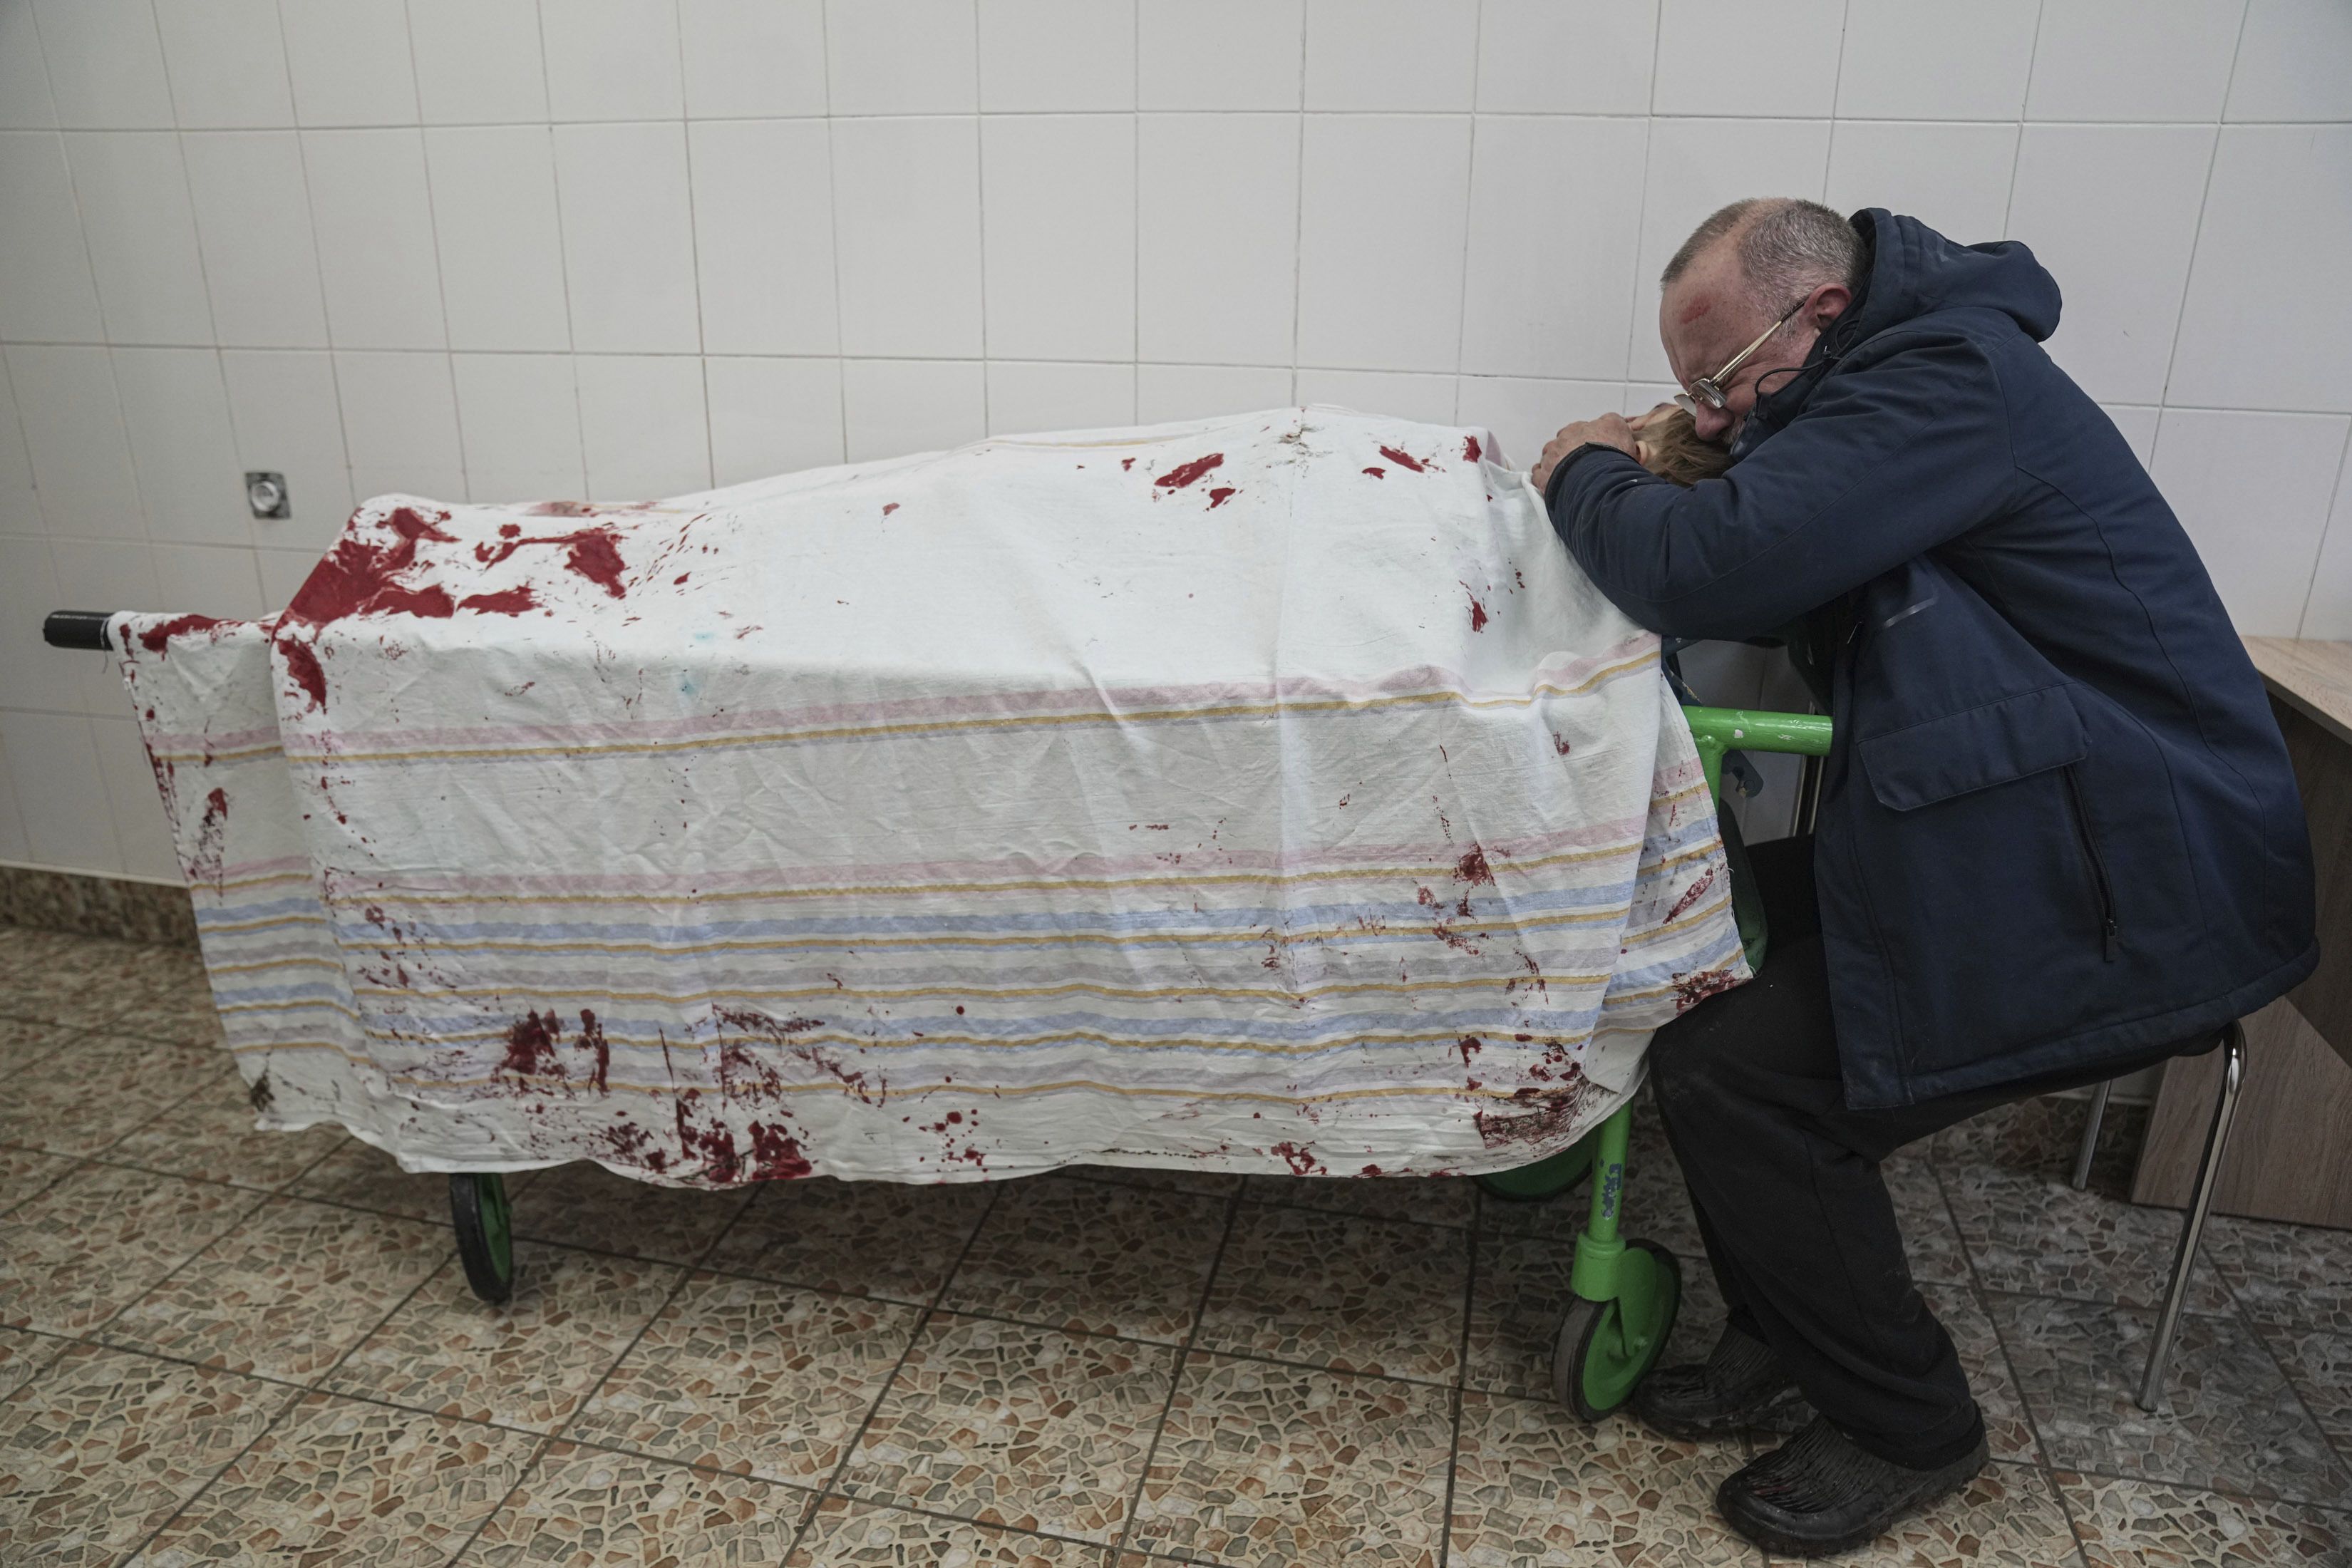 Serhii, father of teenager Iliya, cries on his son's lifeless body lying on a stretcher at a maternity hospital converted into a medical ward in Mariupol / © Associated Press